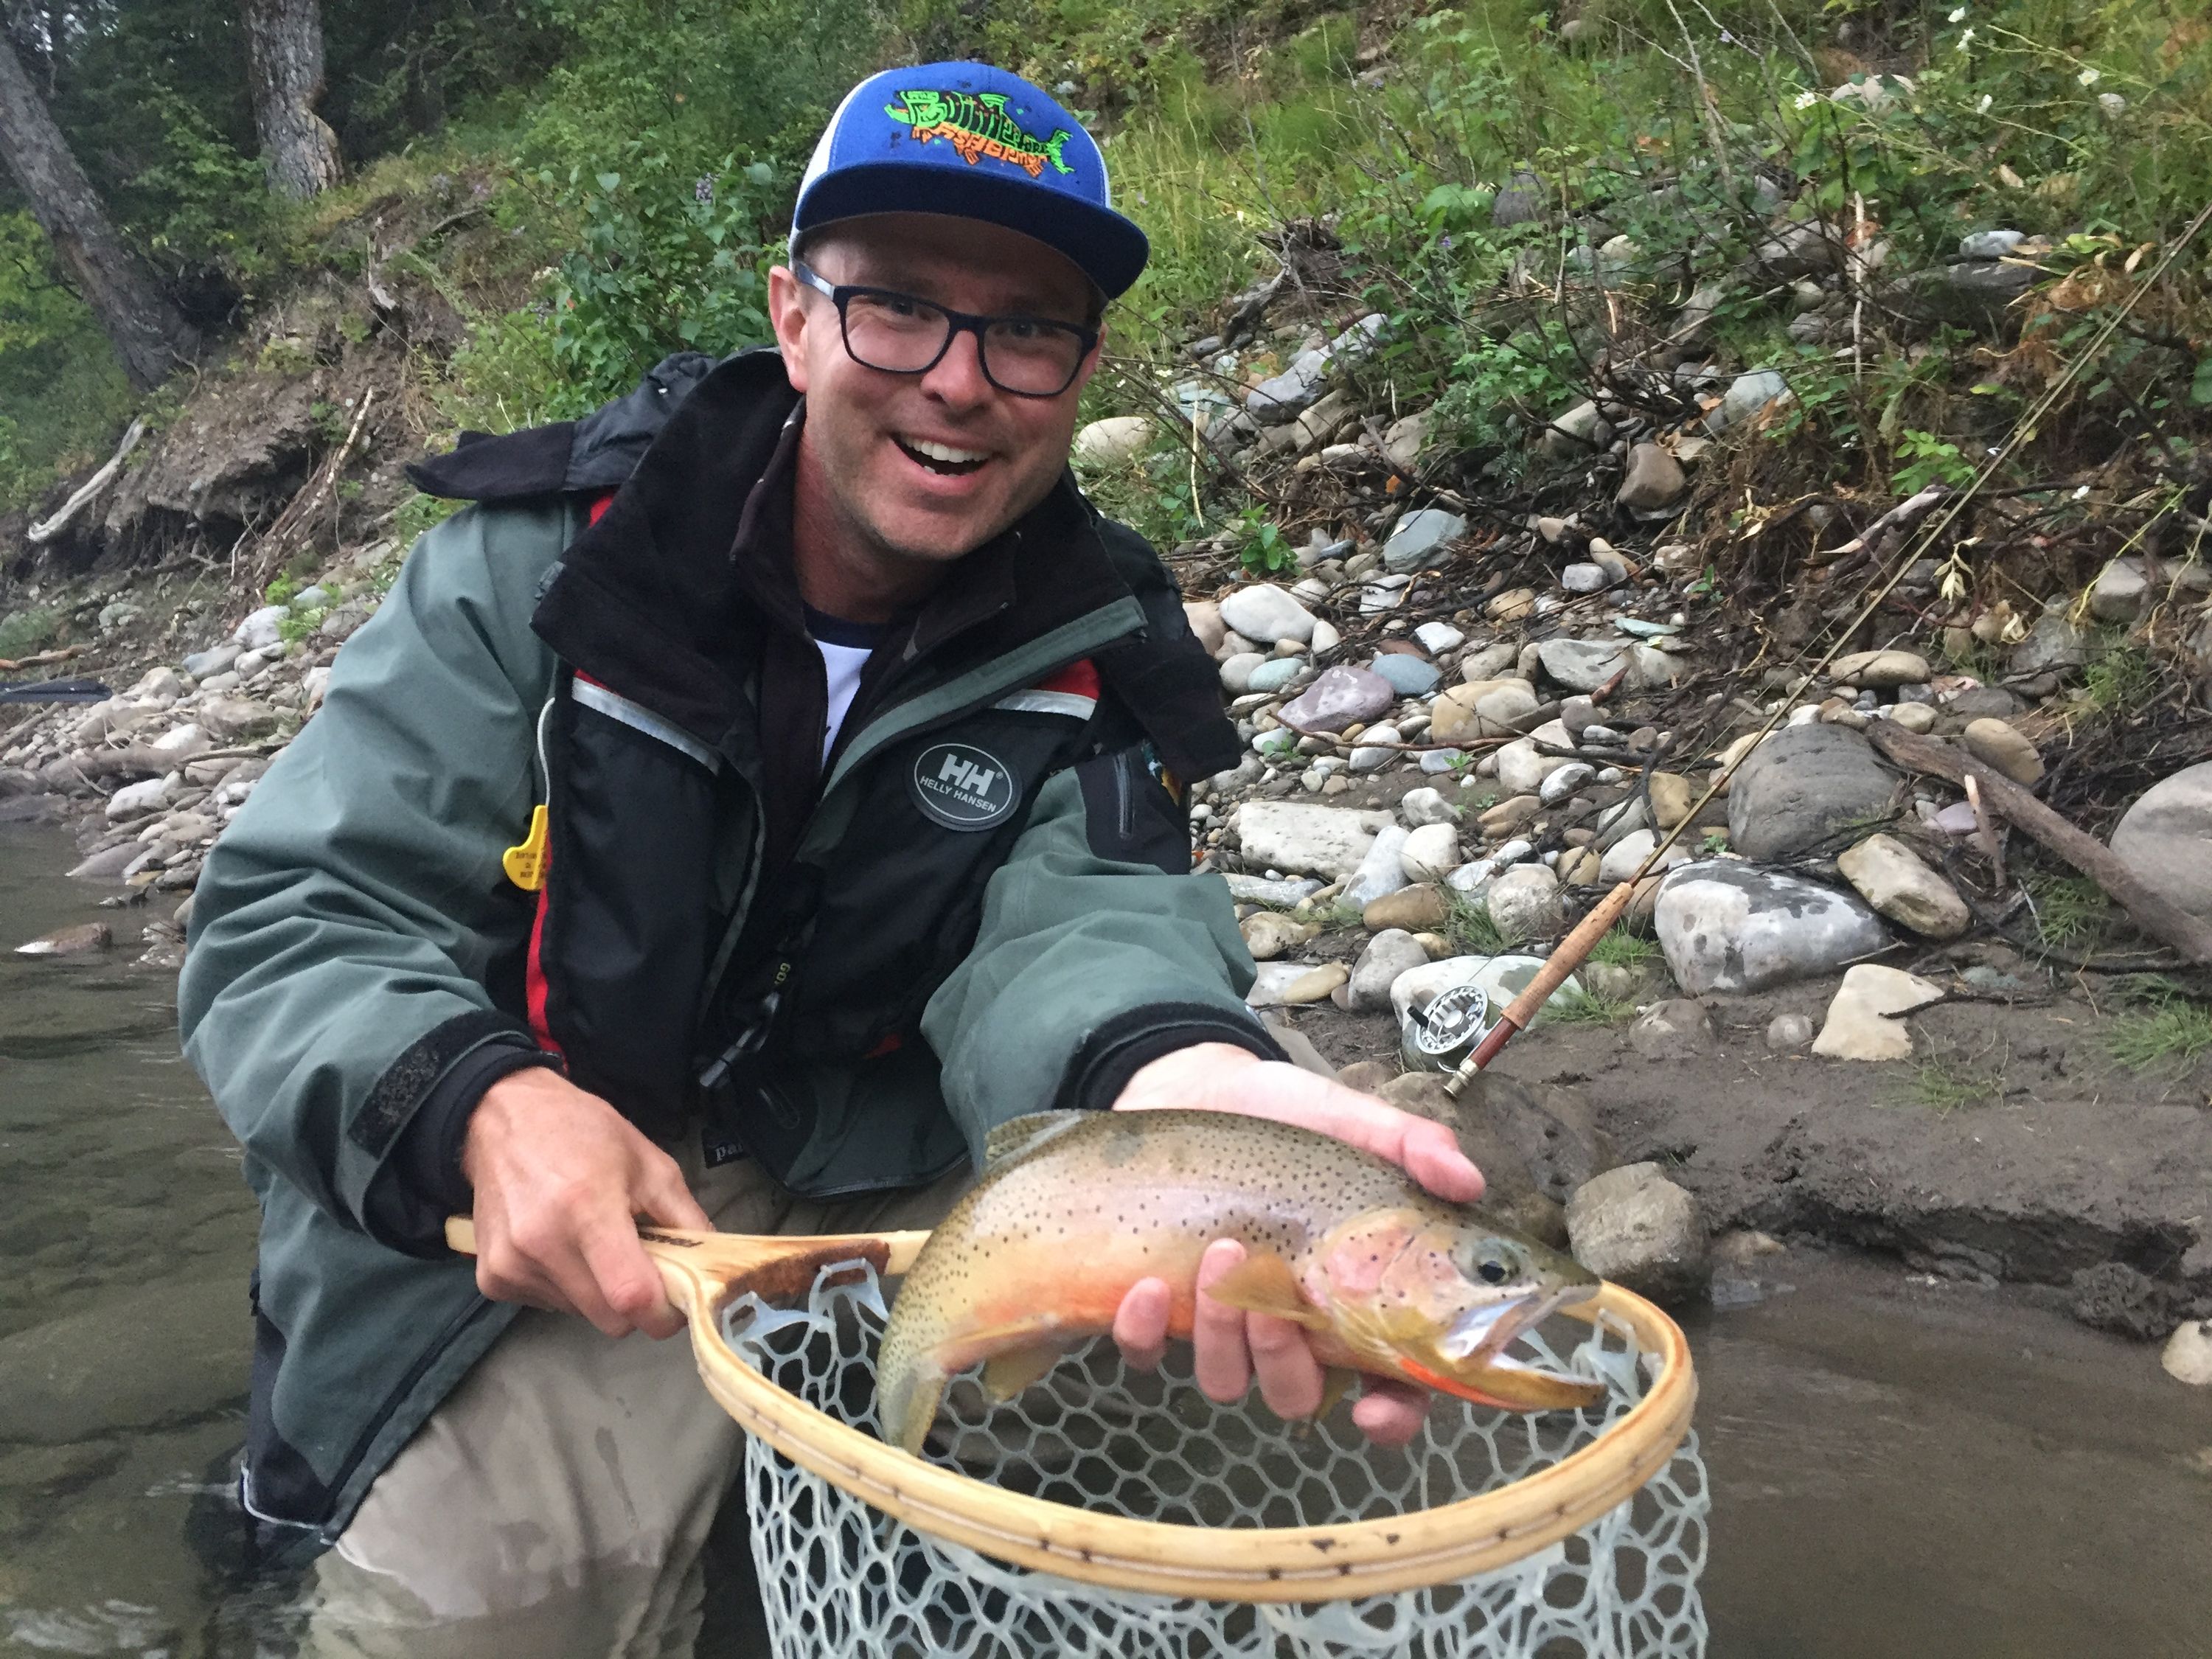 Jim Hoey Heres how to catch trout when fly fishing in our Rocky Mountain streams Calgary Herald